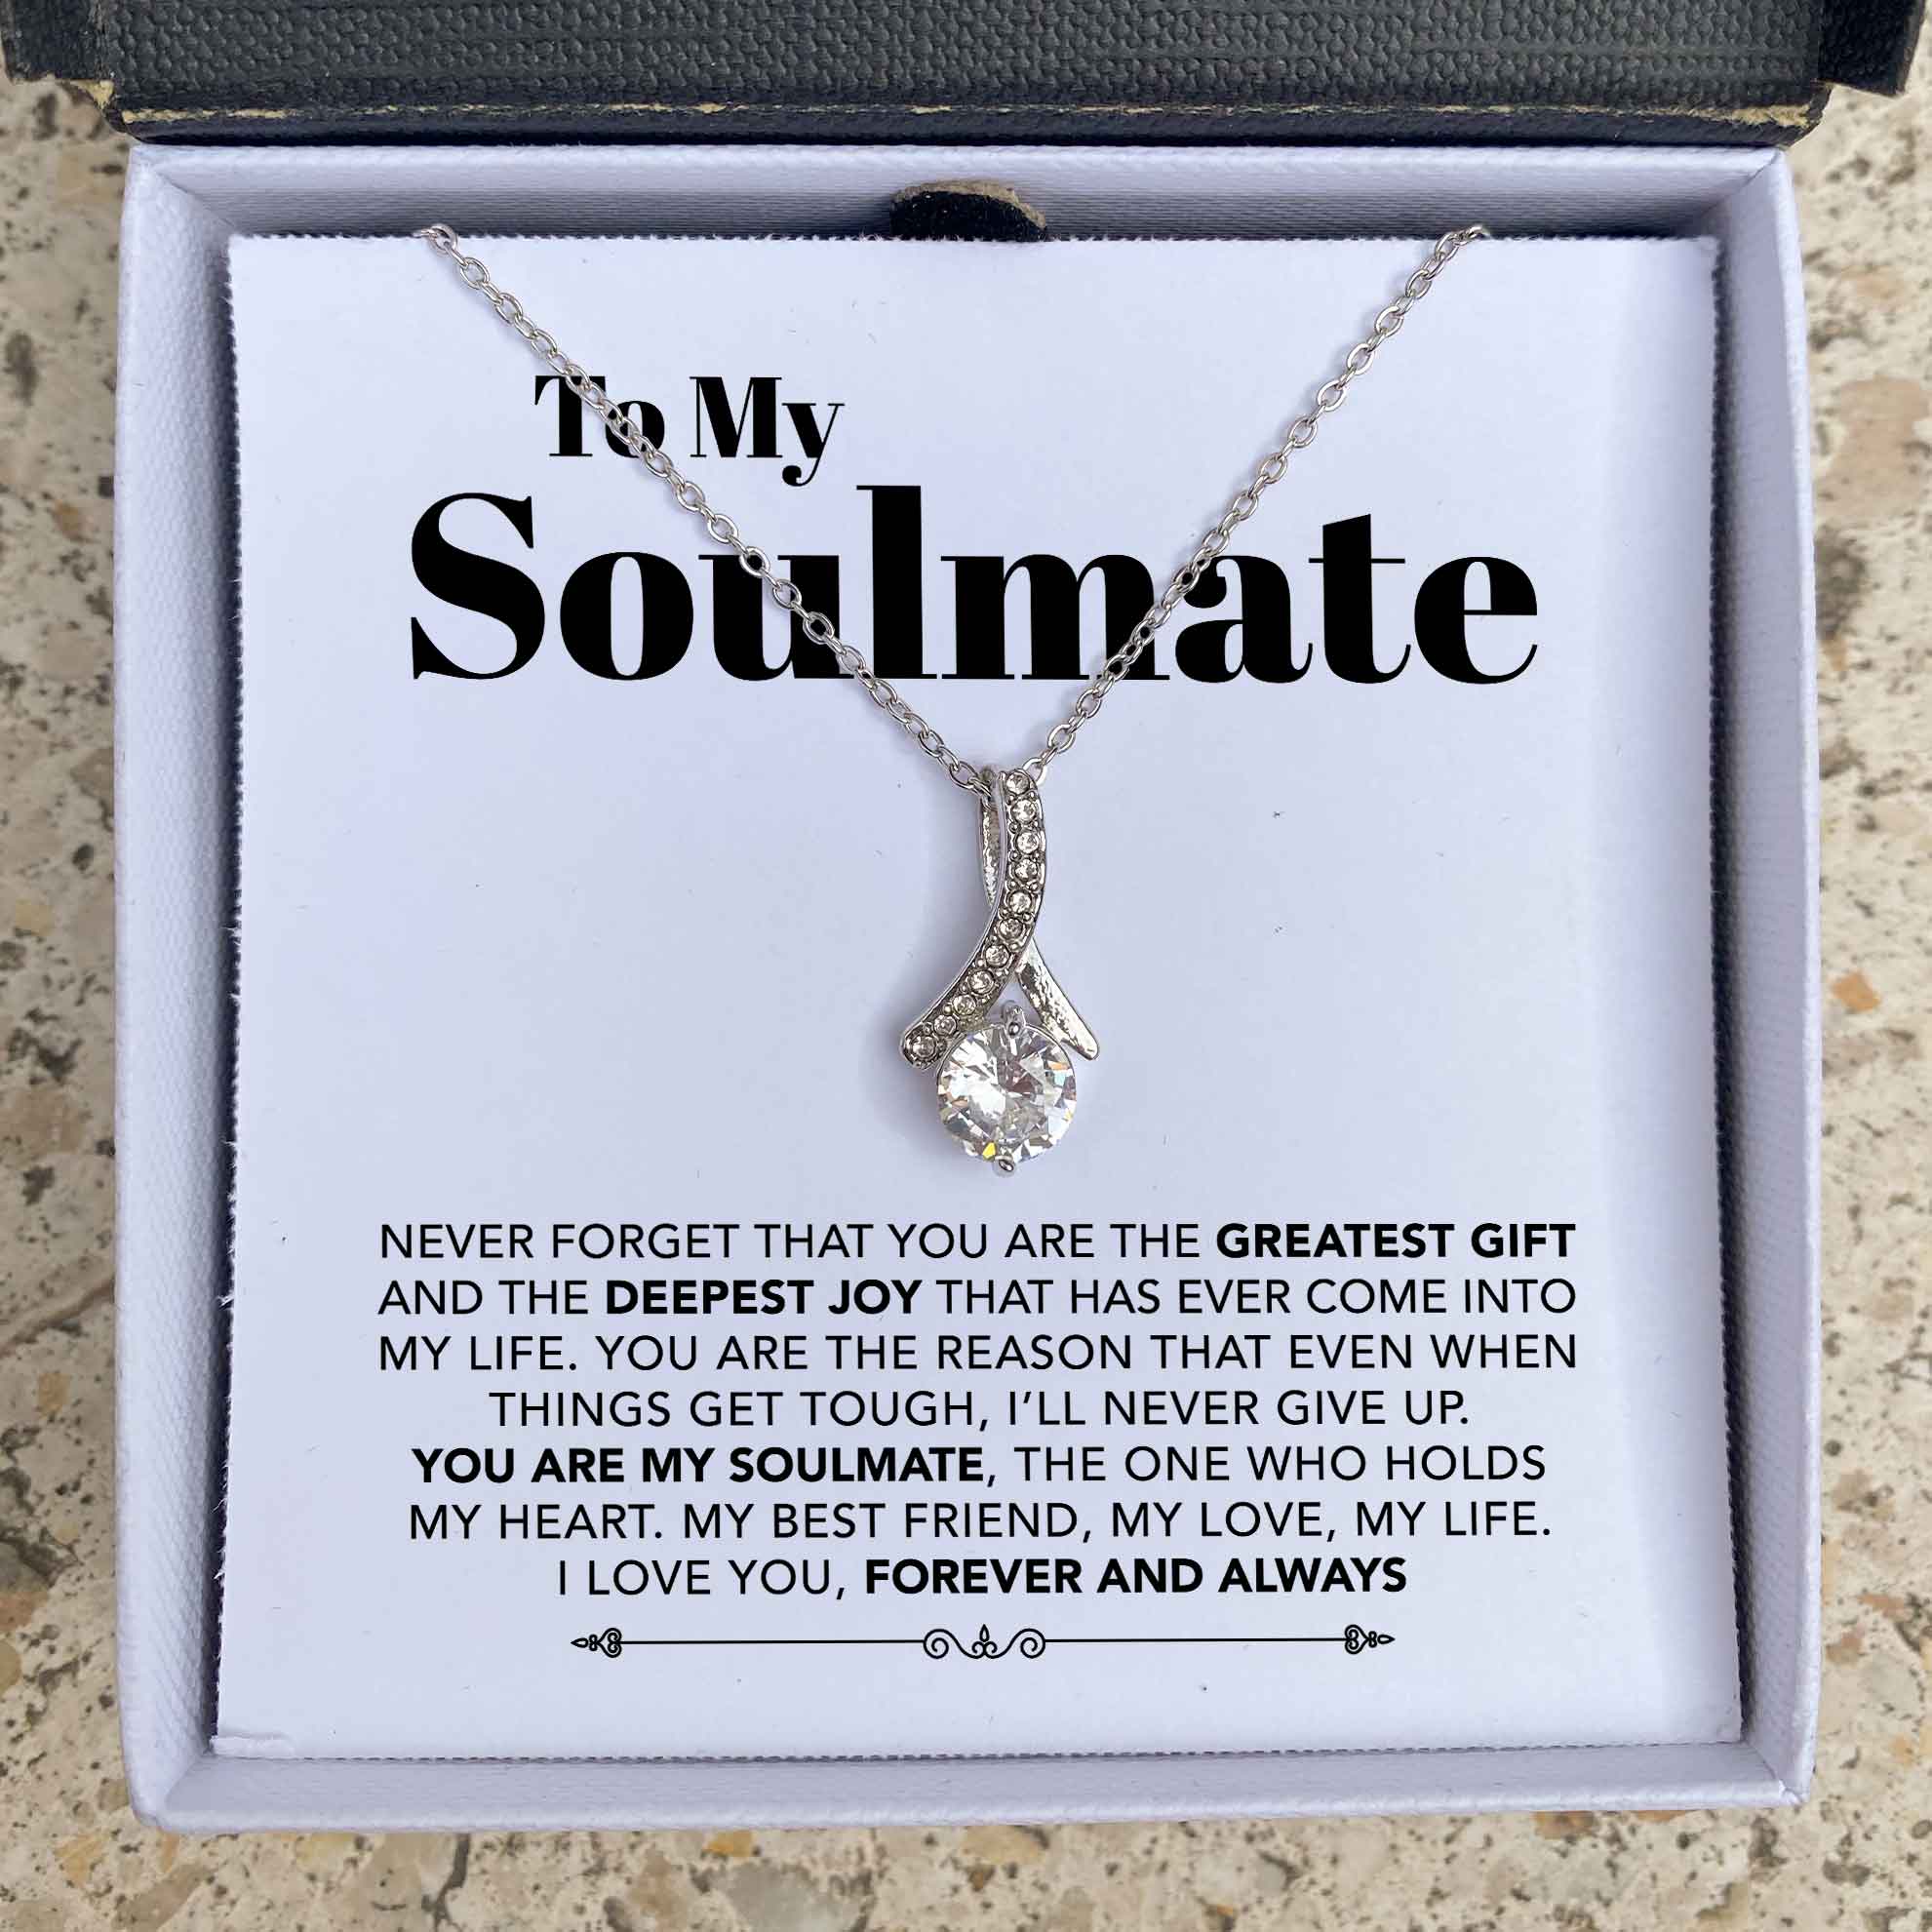 GlowUp Two-Toned Box To My Soulmate - My Best Friend, My Love, My Life - Ribbon Necklace